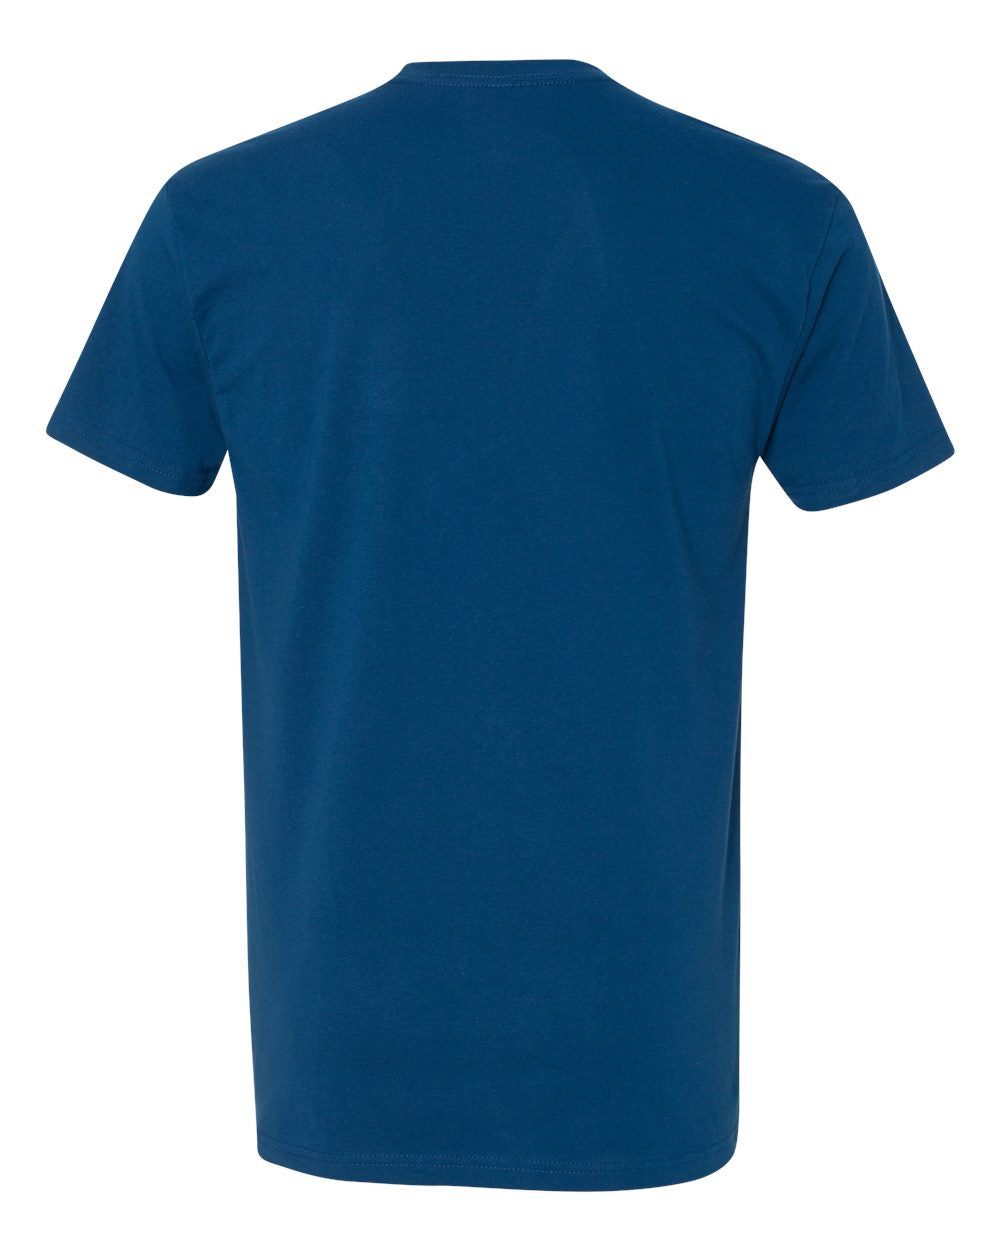 Next Level Tee 3600 - Cool Blue